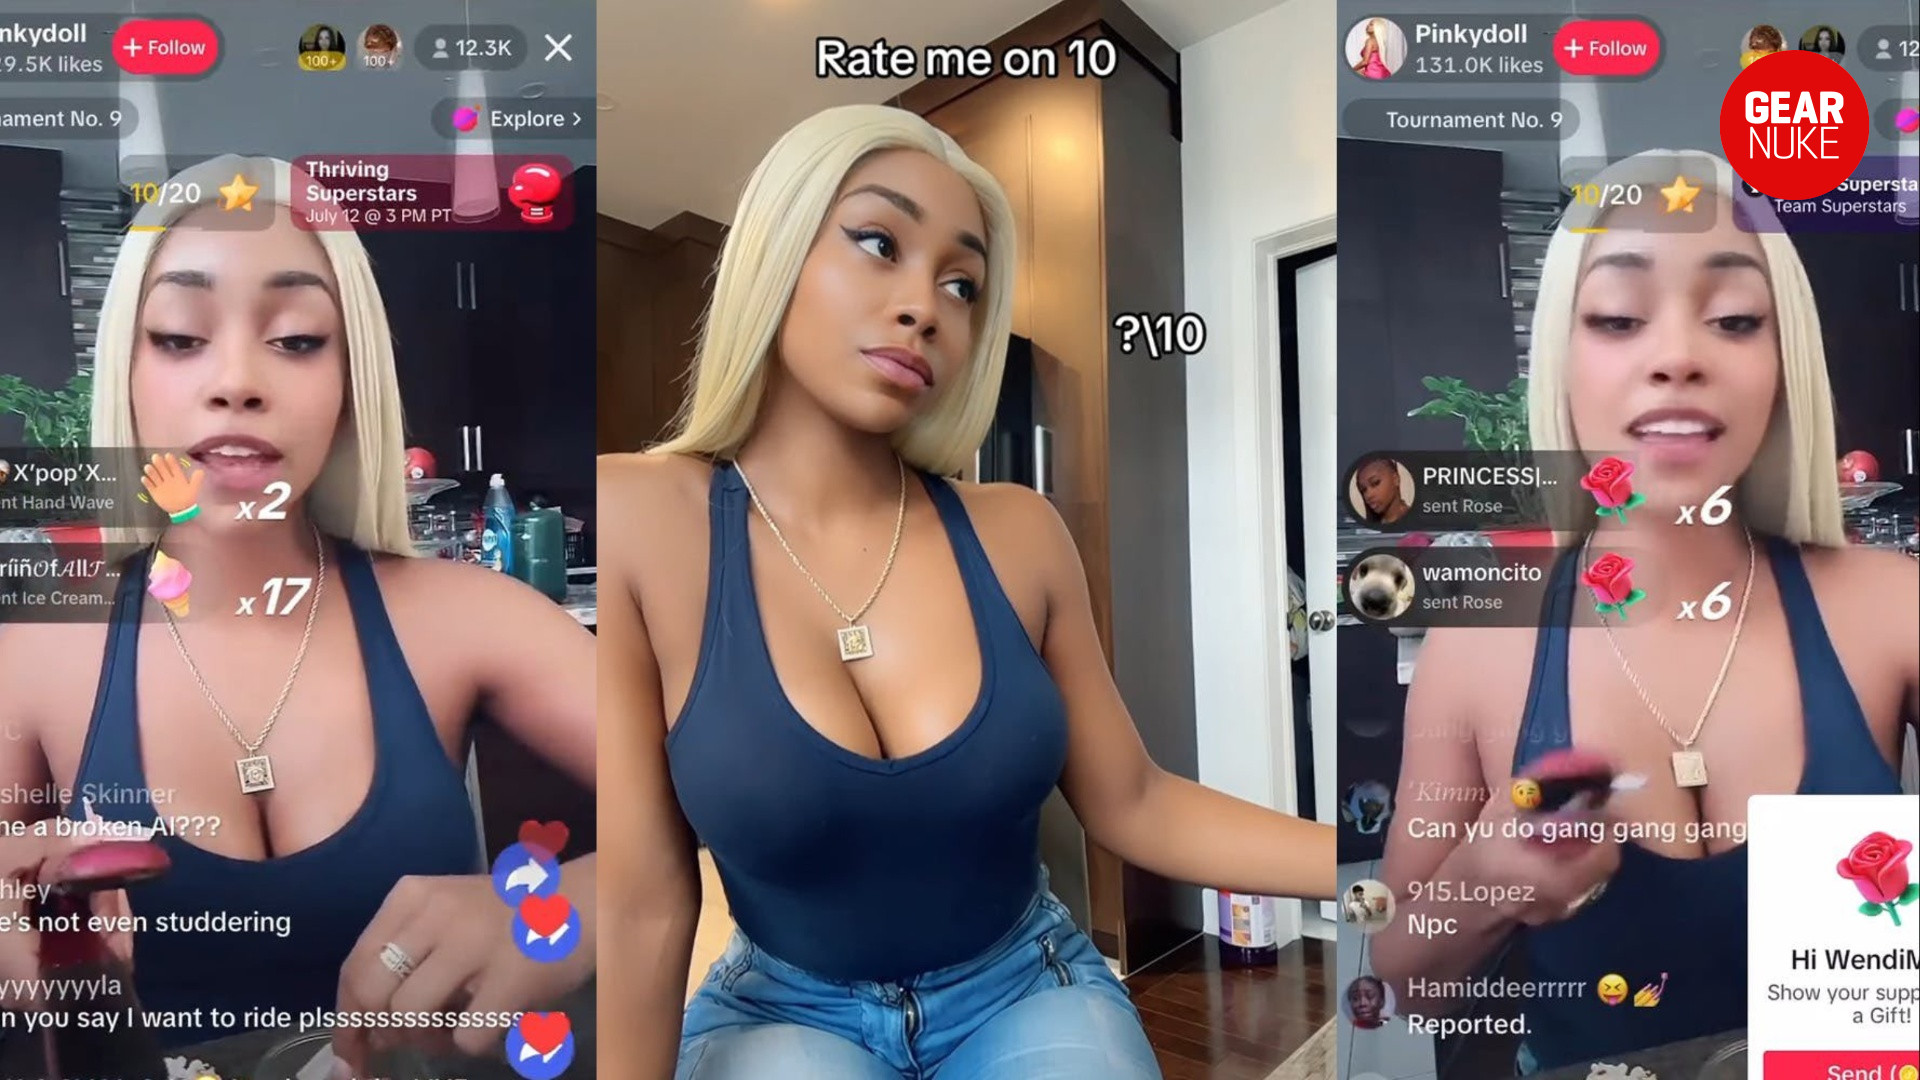 This s**t is f**king disturbing - Streaming community reacts to ExtraEmily  doing the viral TikTok NPC trend